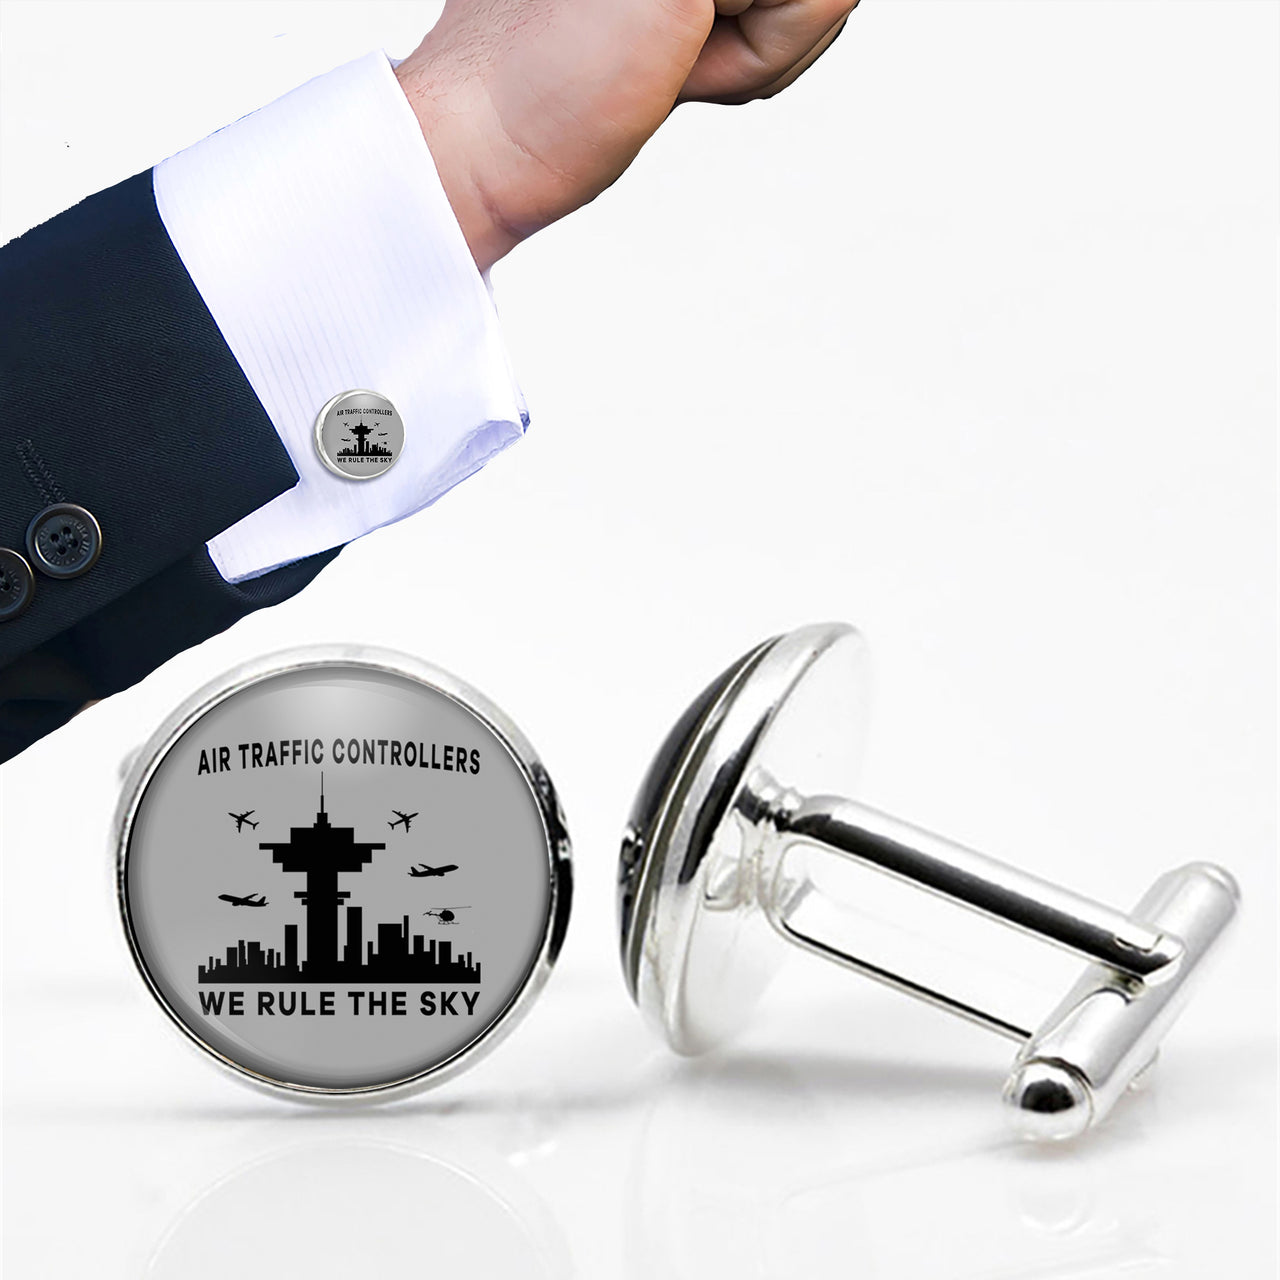 Air Traffic Controllers - We Rule The Sky Designed Cuff Links